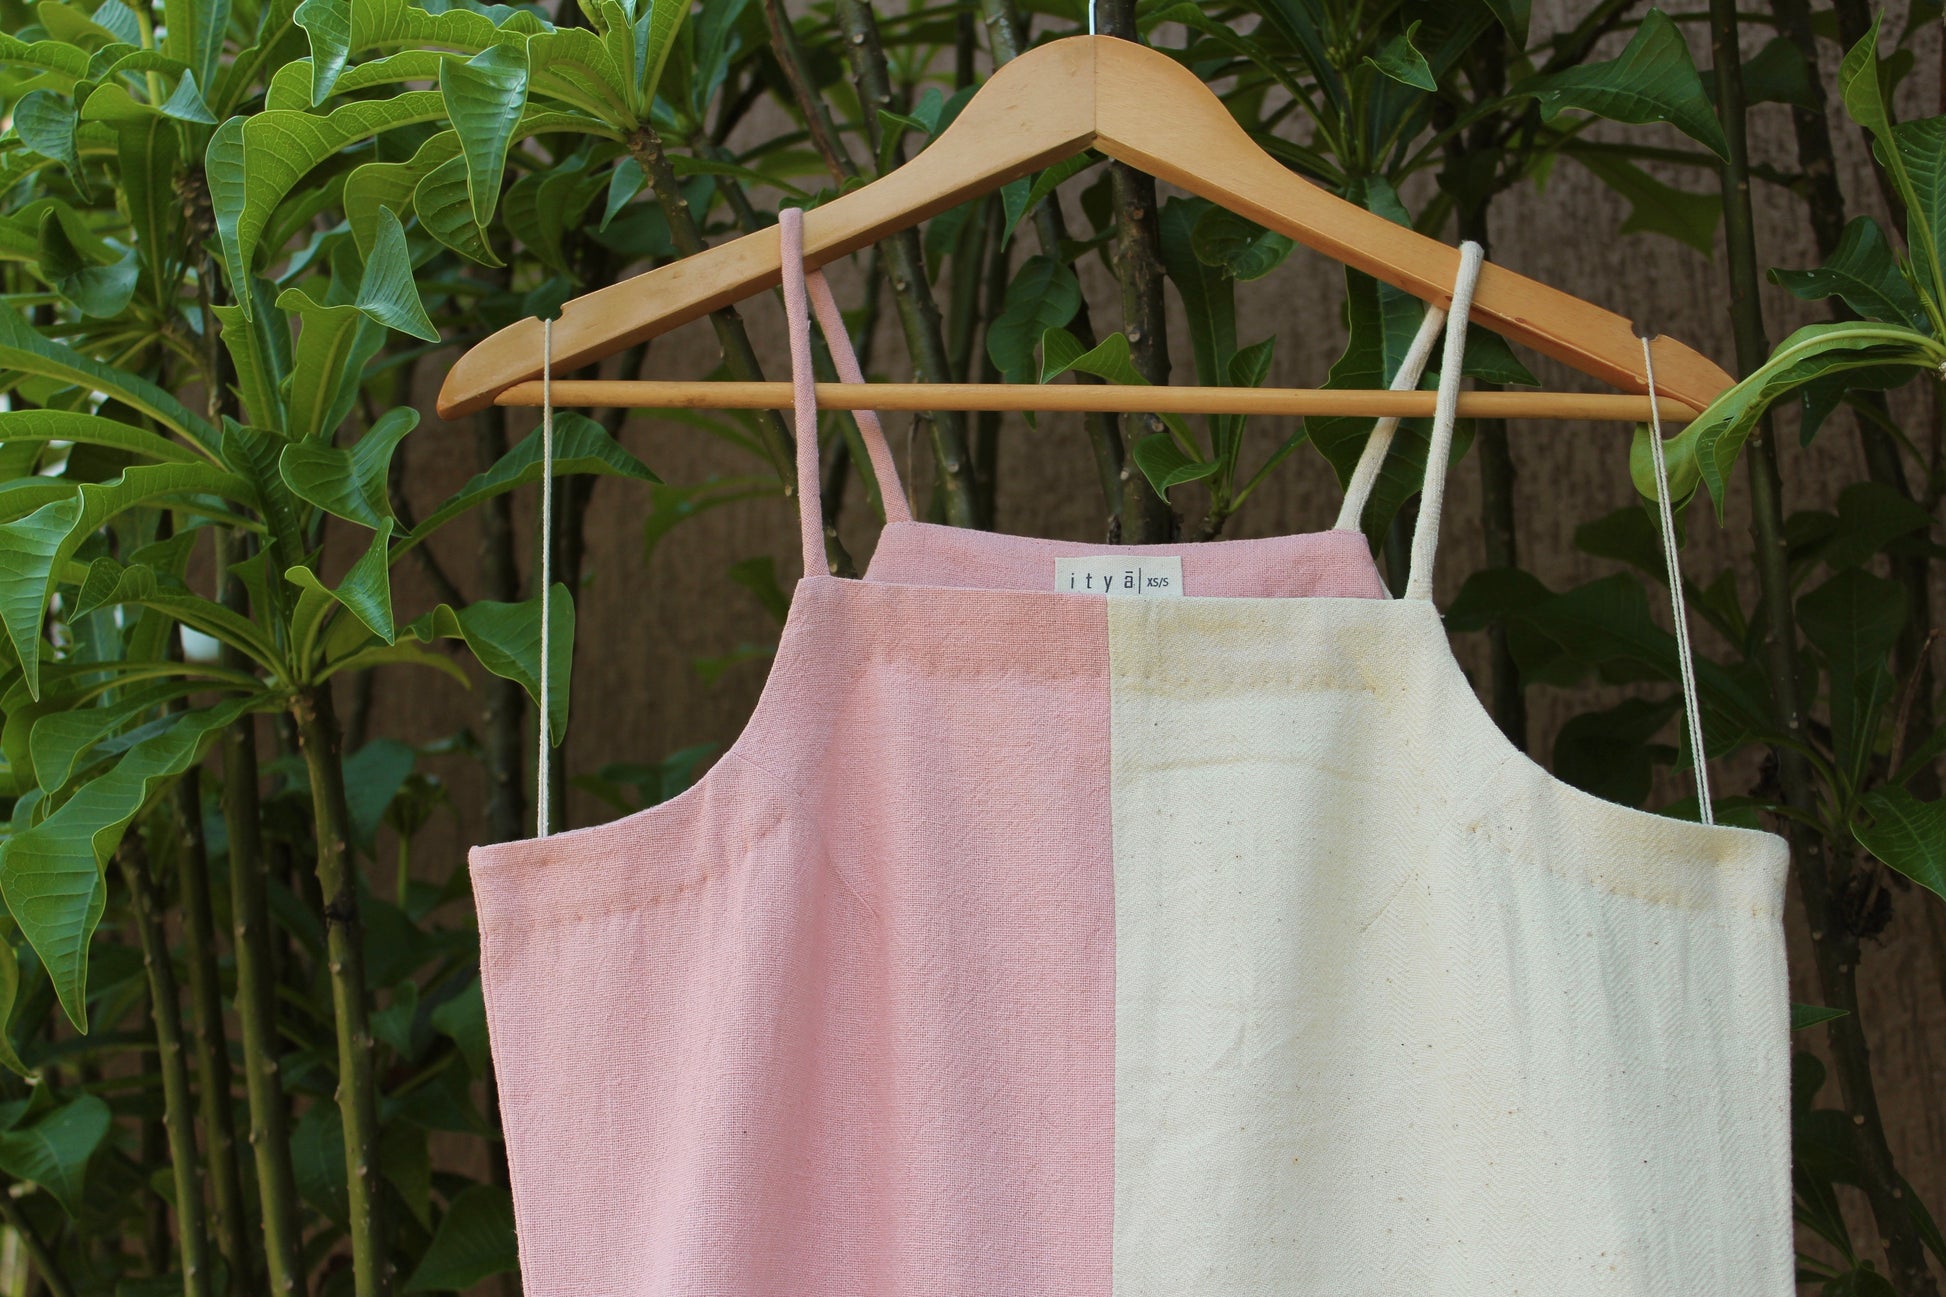 Tansi Slip Dress at Kamakhyaa by Itya. This item is Casual Wear, Hand Spun Cotton, Handwoven cotton, Midi Dresses, Natural, Pastel Perfect, Pastel Perfect by Itya, Pink, Plant Dye, Regular Fit, Sleeveless Dresses, Solids, SS22, Womenswear